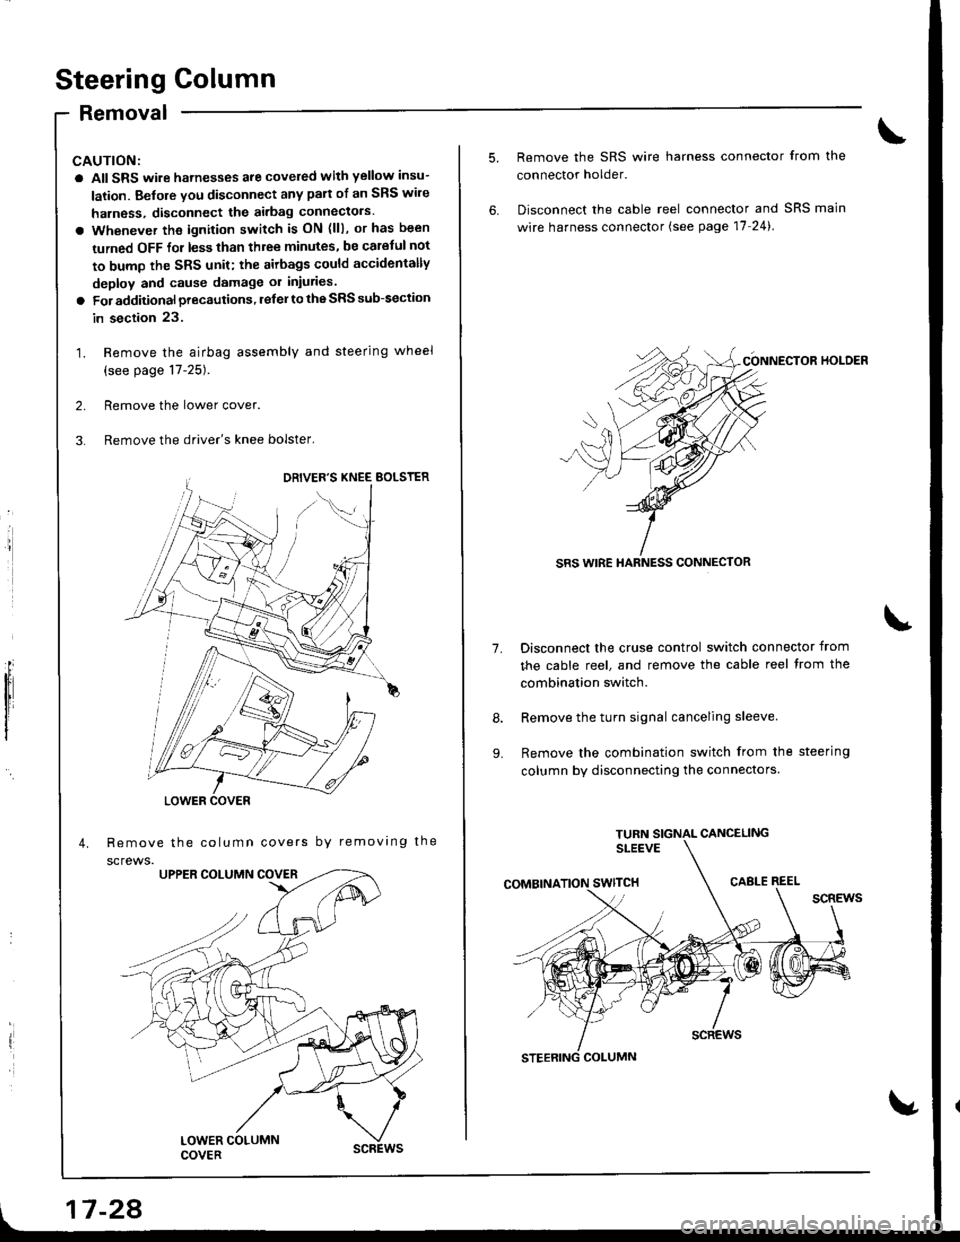 HONDA INTEGRA 1998 4.G Workshop Manual Steering Golumn
Removal
I
a All SRS wire harnesses are covered with yellow insu-
lation. Before vou disconnect any pan of an SRS wire
harness, disconnect the airbag Gonnectors.
a Whenever the ignition